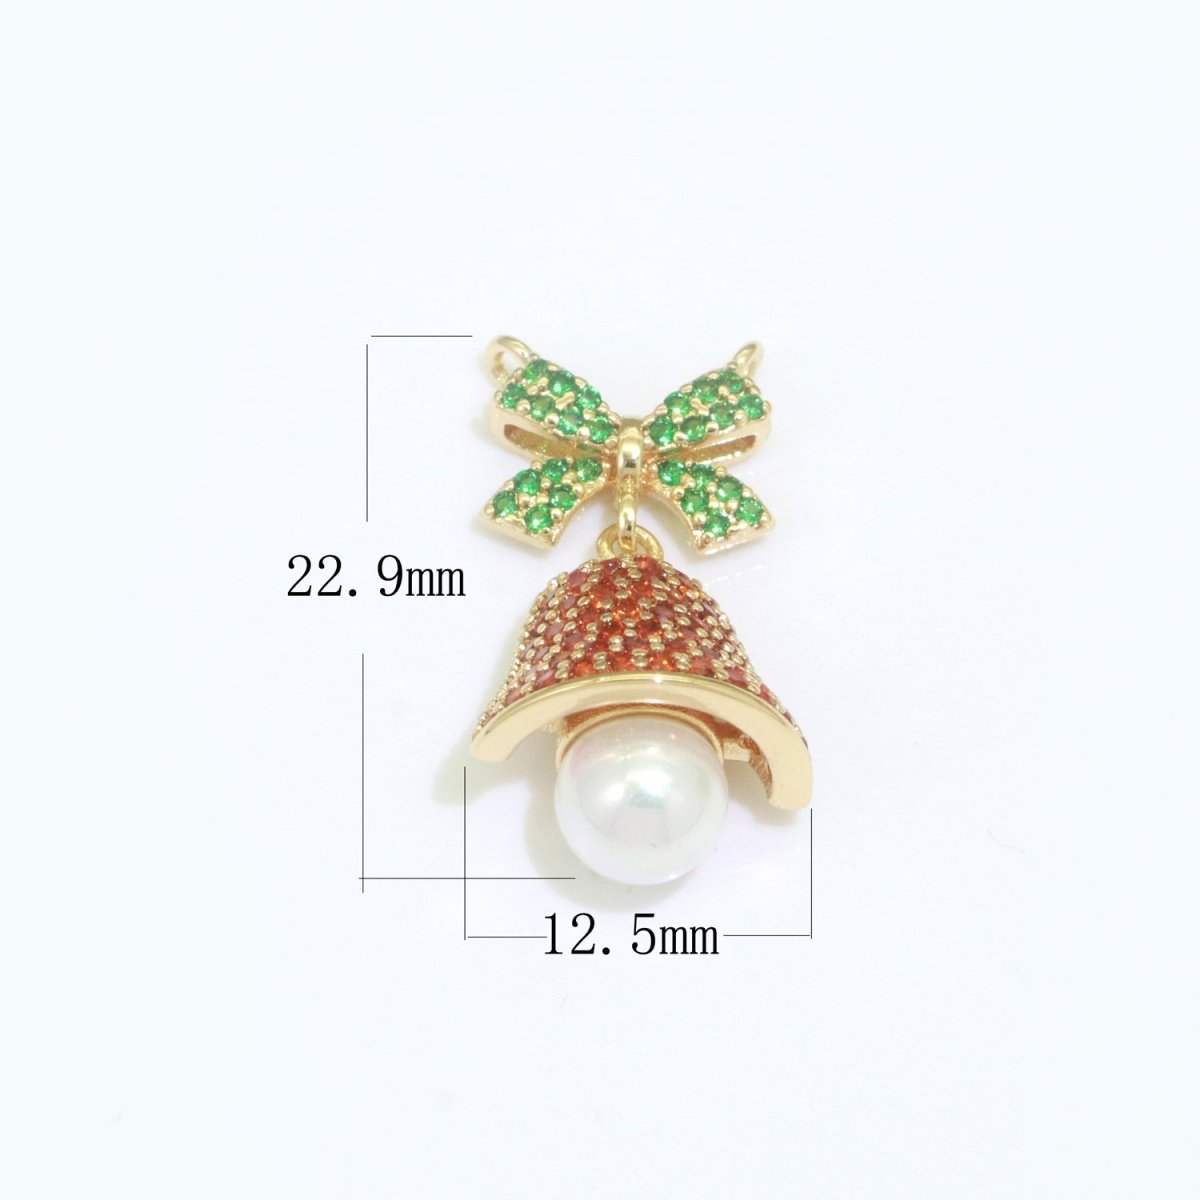 Dainty Christmas charms Micro Pave Holiday Collection Santa, Snow, Stocking, Snow man, Reindeer, Tree Pendant for DiY Jewelry Necklace Bracelet Earring Accessory F-902 F-903 M-594 - M-604 - DLUXCA